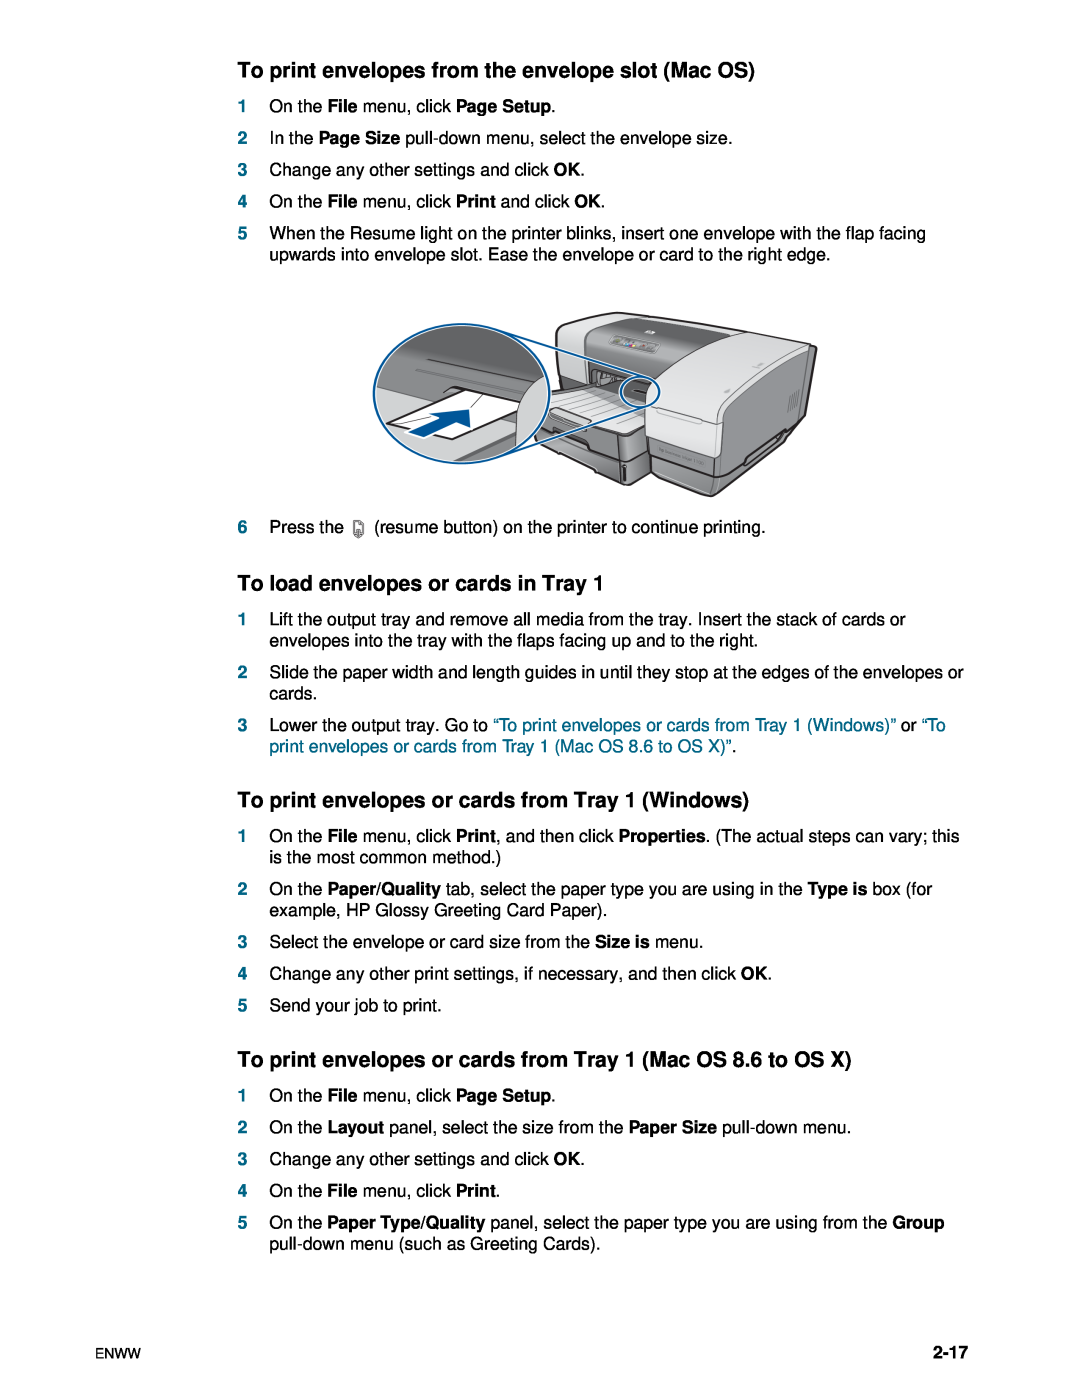 HP 1100dtn manual To print envelopes from the envelope slot Mac OS, To load envelopes or cards in Tray, 2-17 